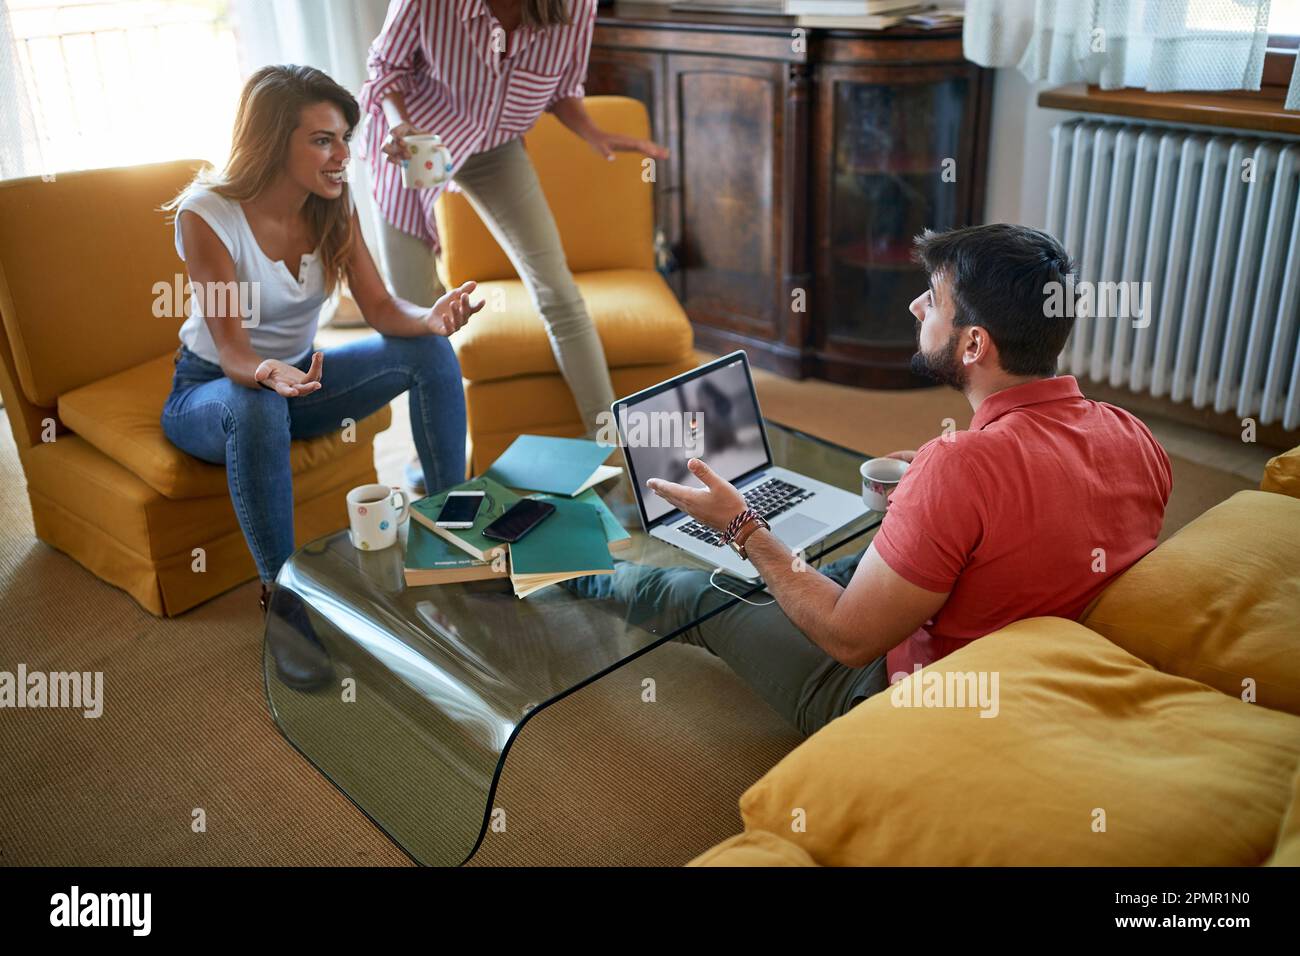 Group of three young students writing paper together at home Stock Photo